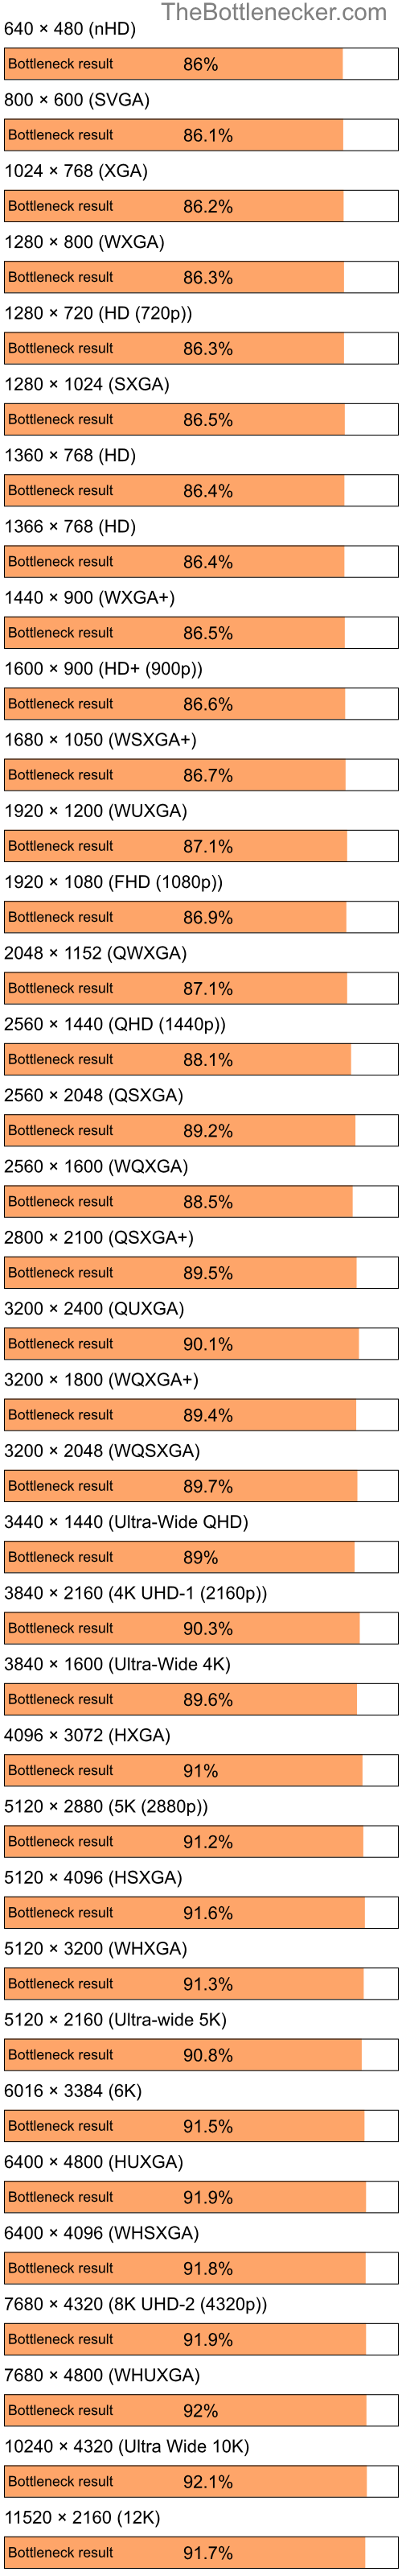 Bottleneck results by resolution for Intel Celeron M 420 and NVIDIA GeForce Go 6100 in Graphic Card Intense Tasks